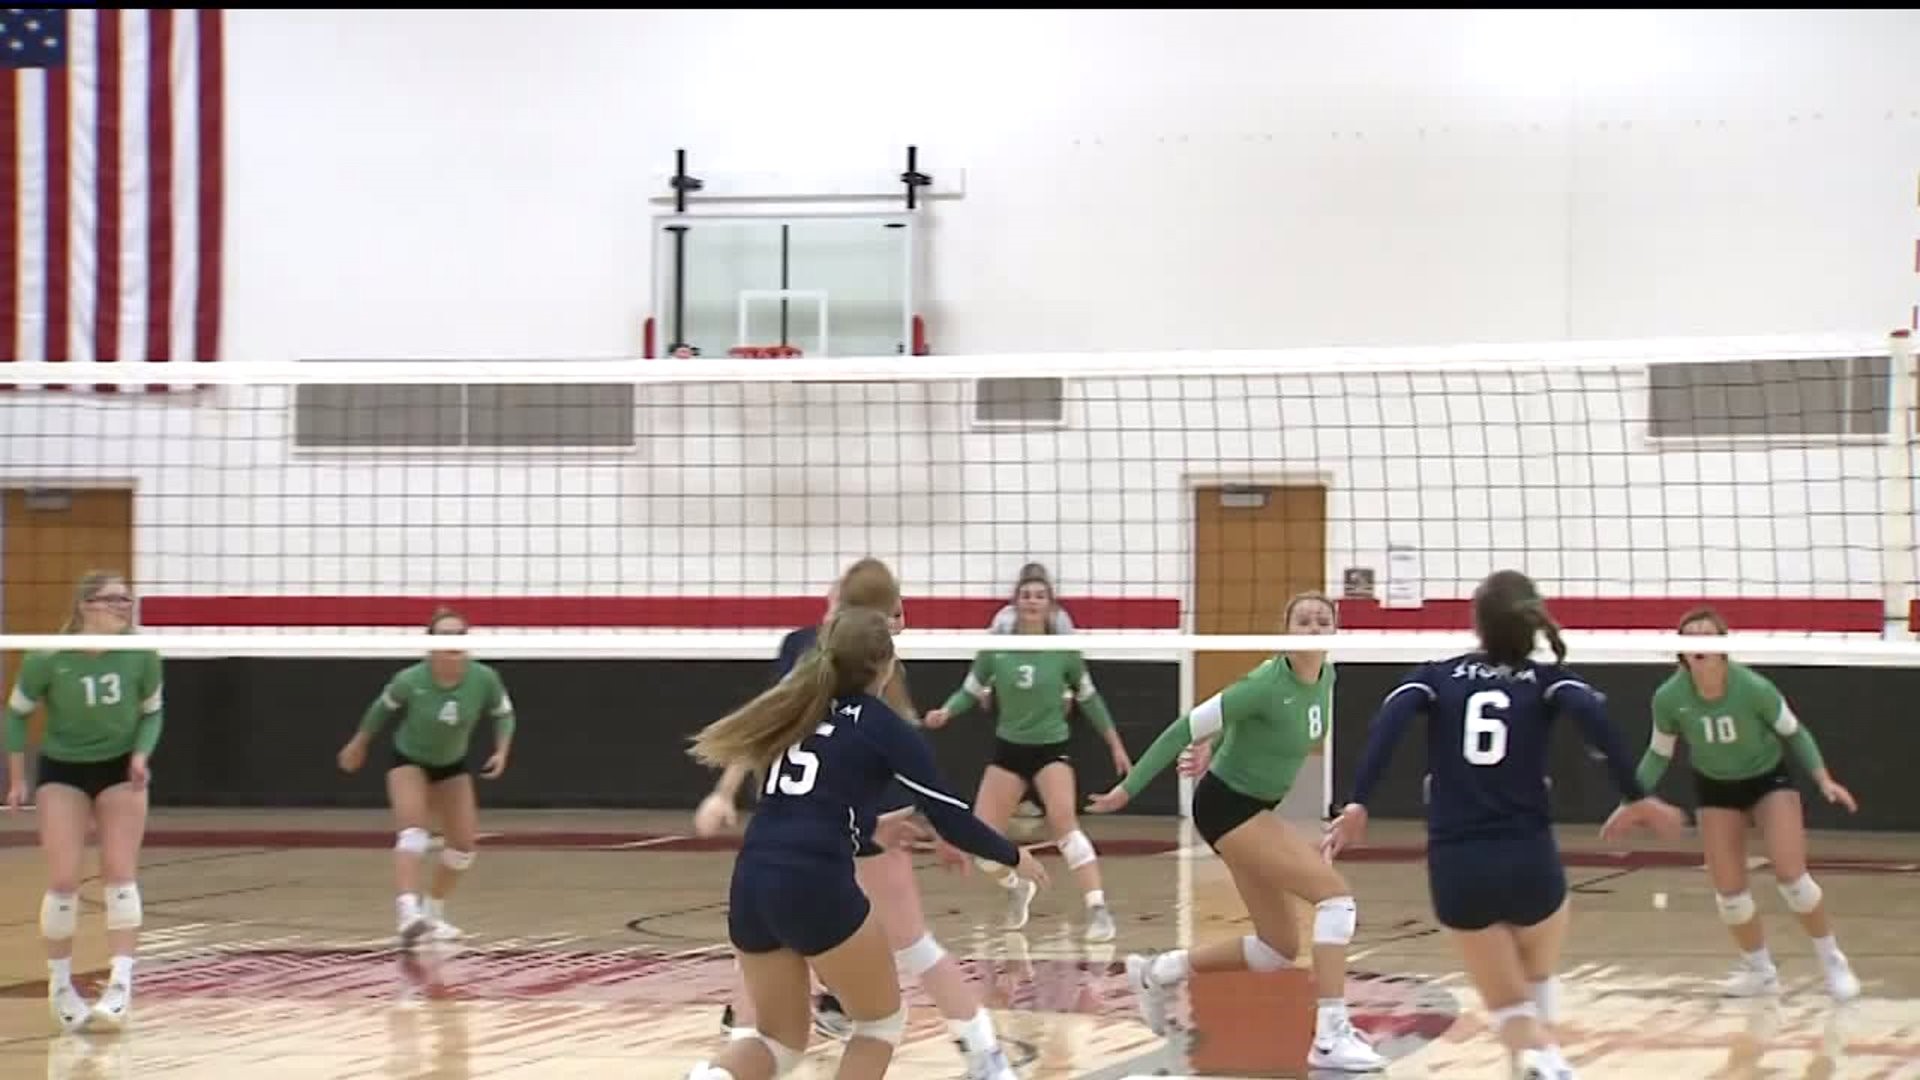 Sectional volleyball coverage in Illinois